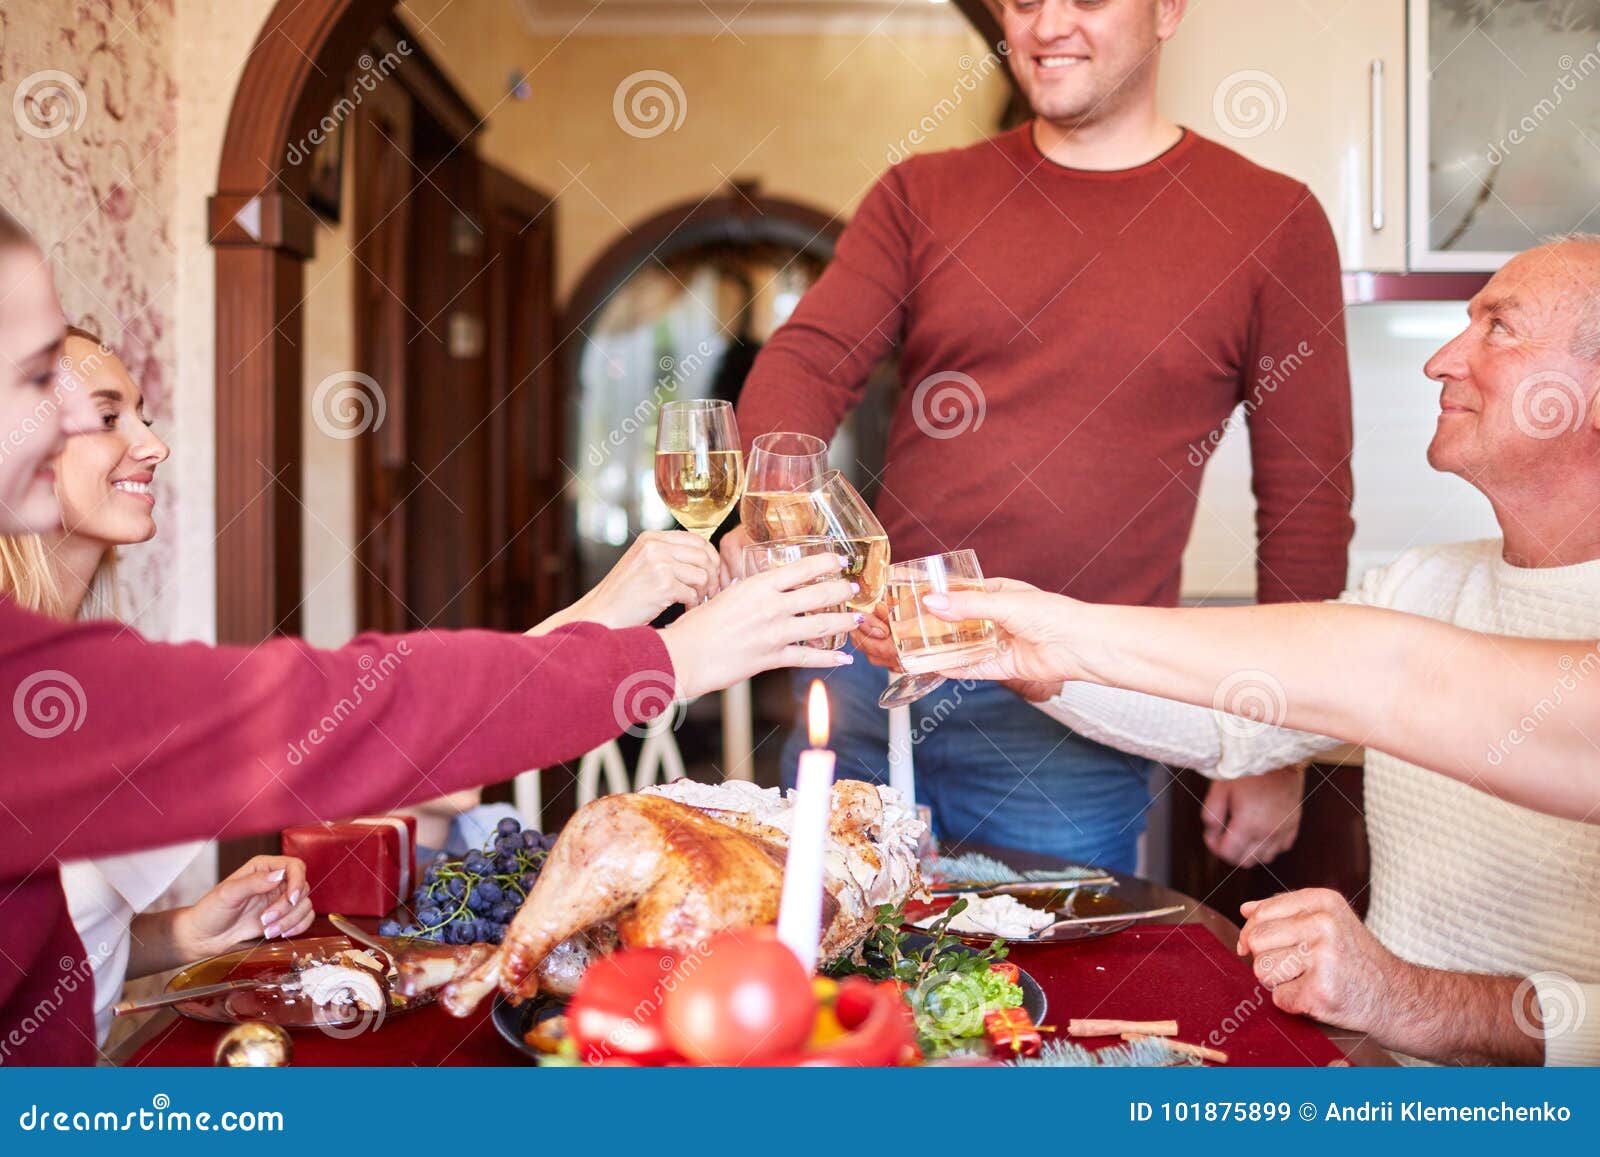 Family Cheering and Drinking on Thanksgiving on a Blurred Background photo